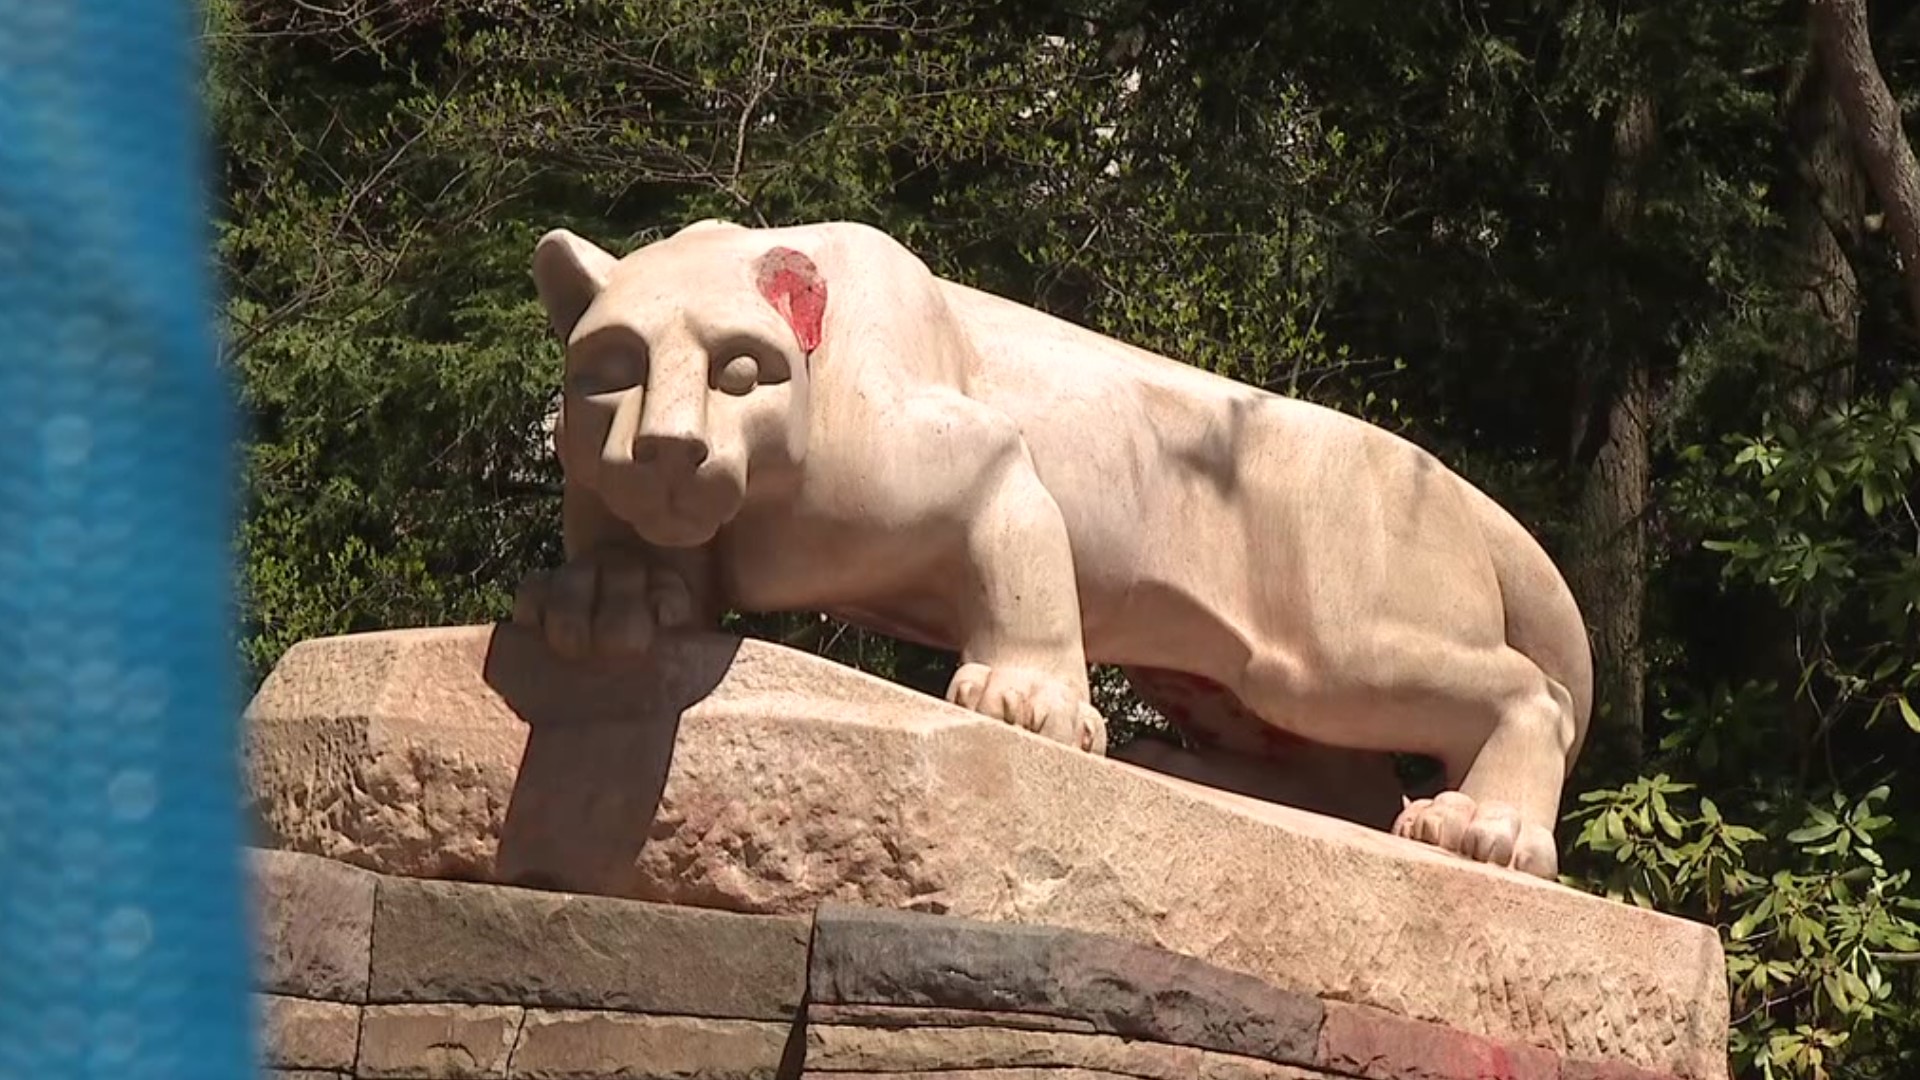 The Nittany Lion statue is a popular spot for snapshots at Penn State University, but it was damaged over the weekend.